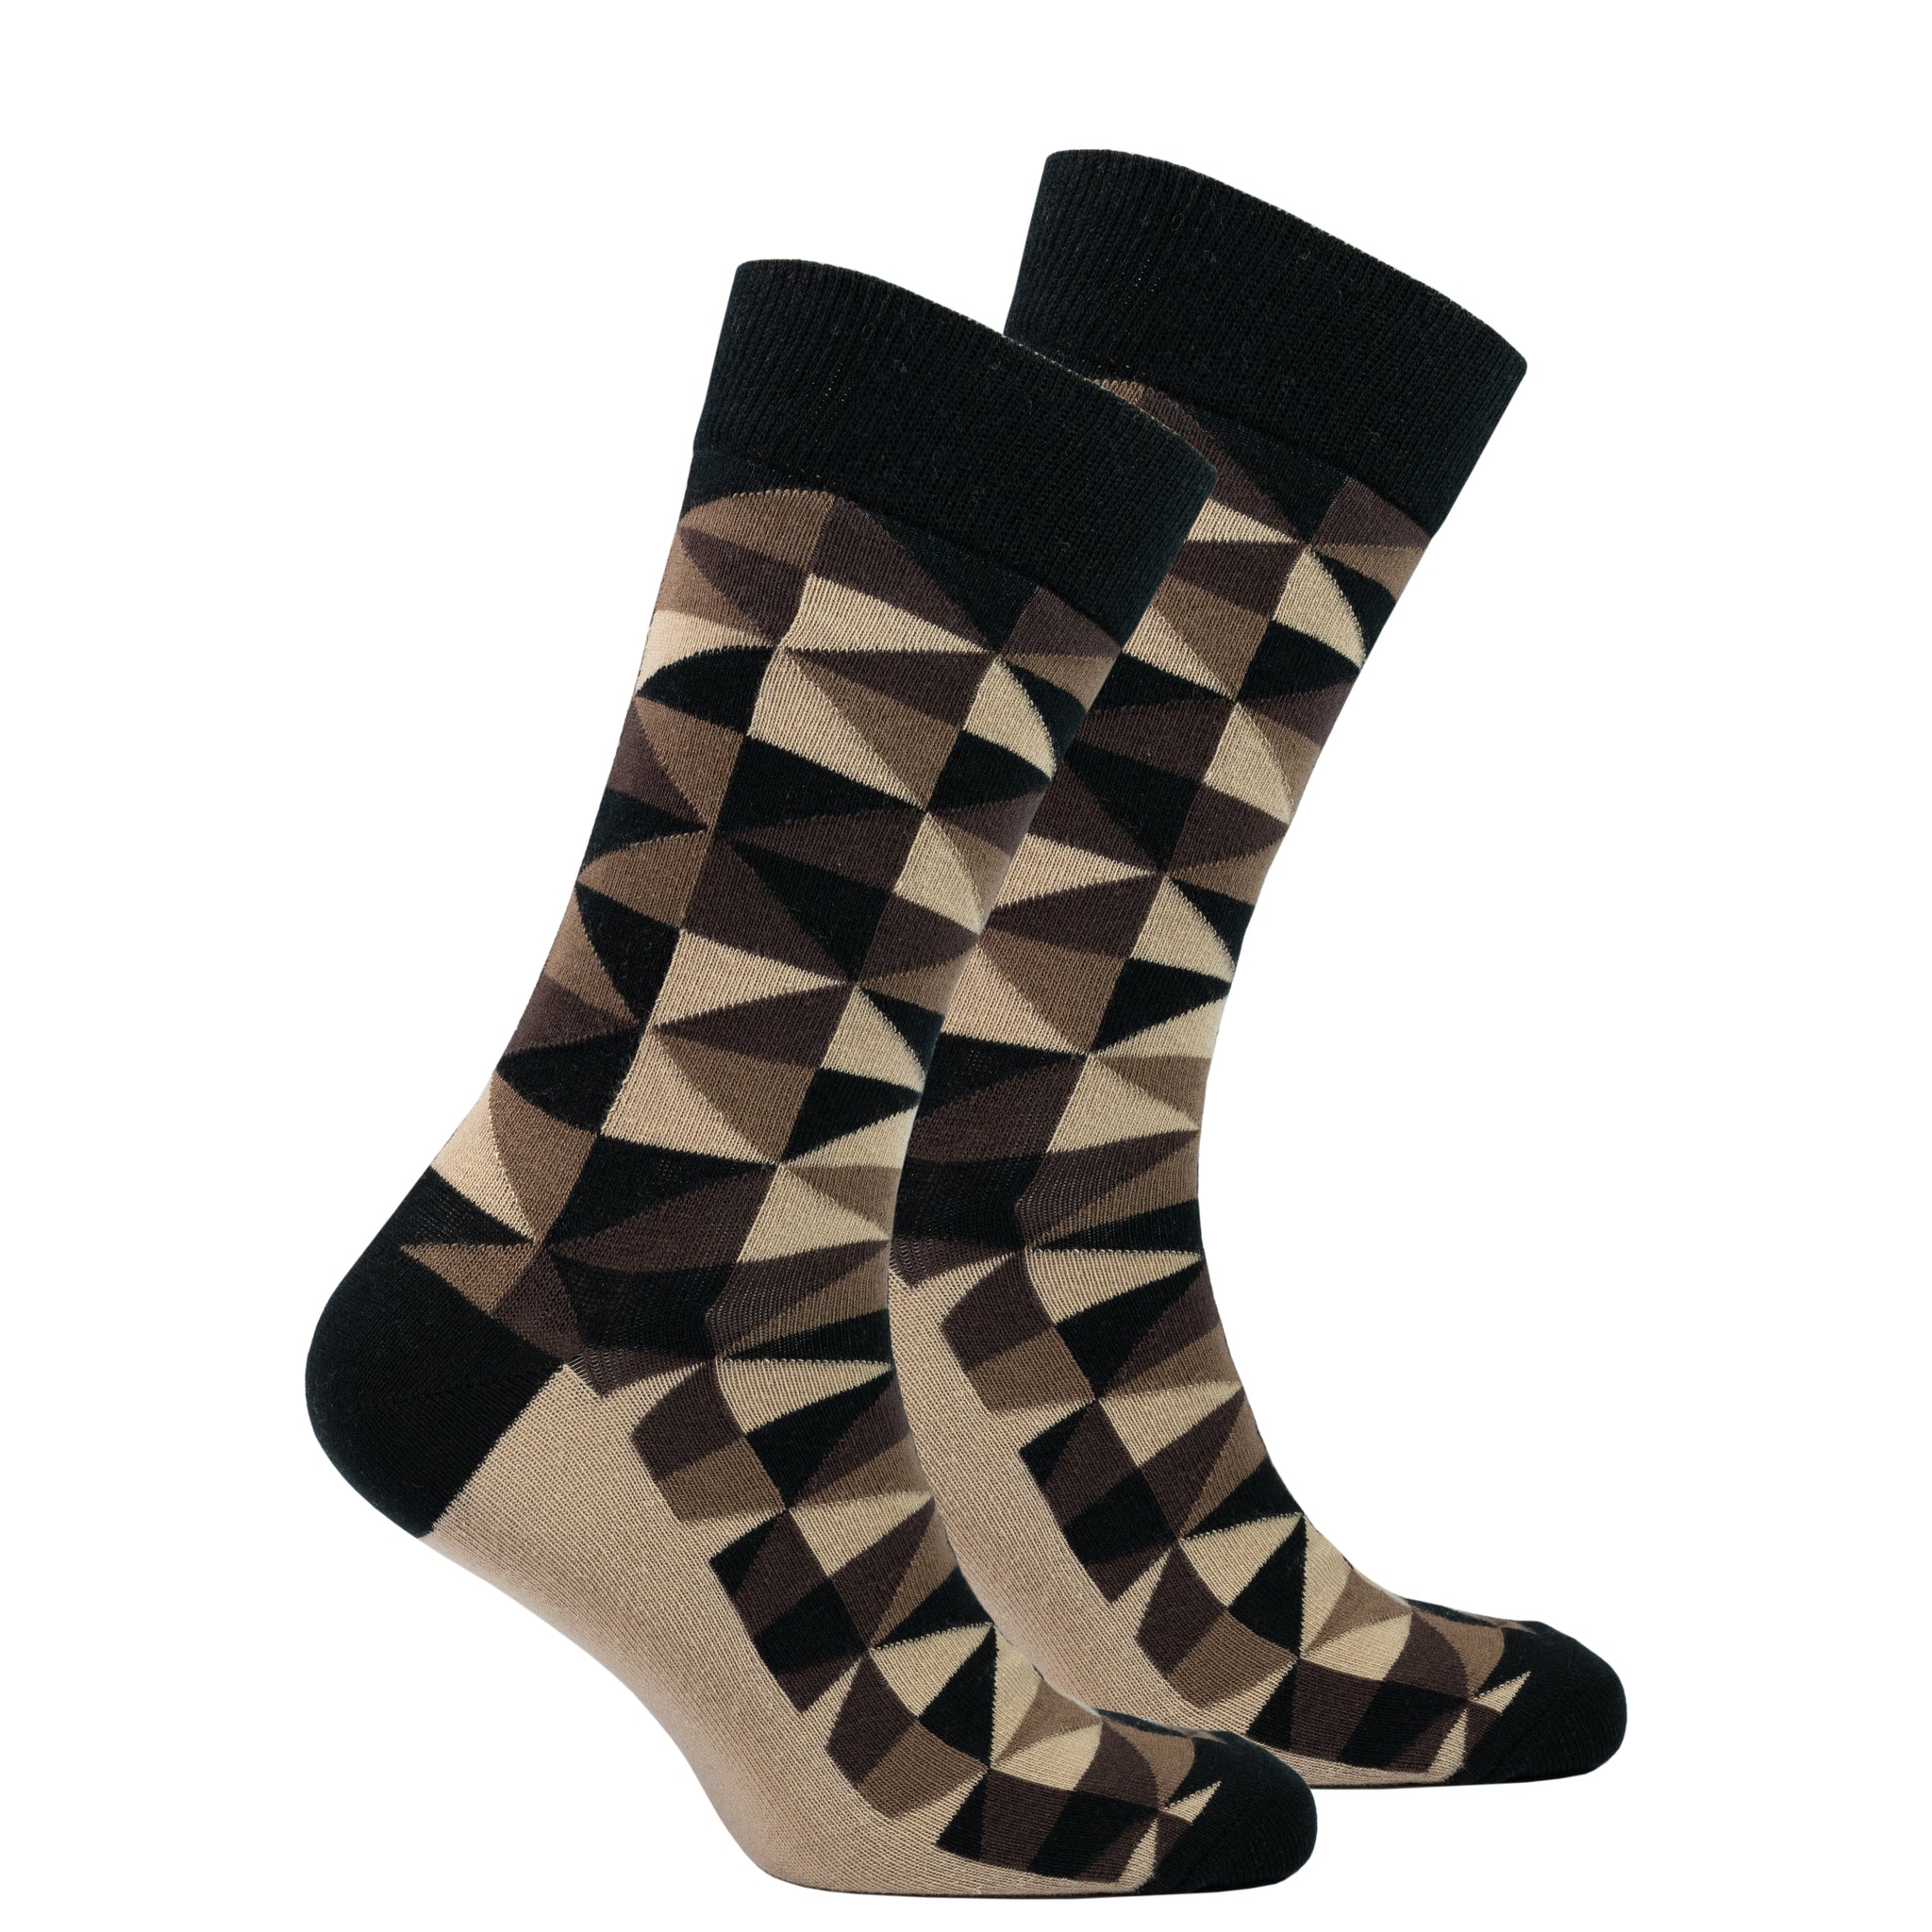 Men's Sand Triangle Socks black and brown